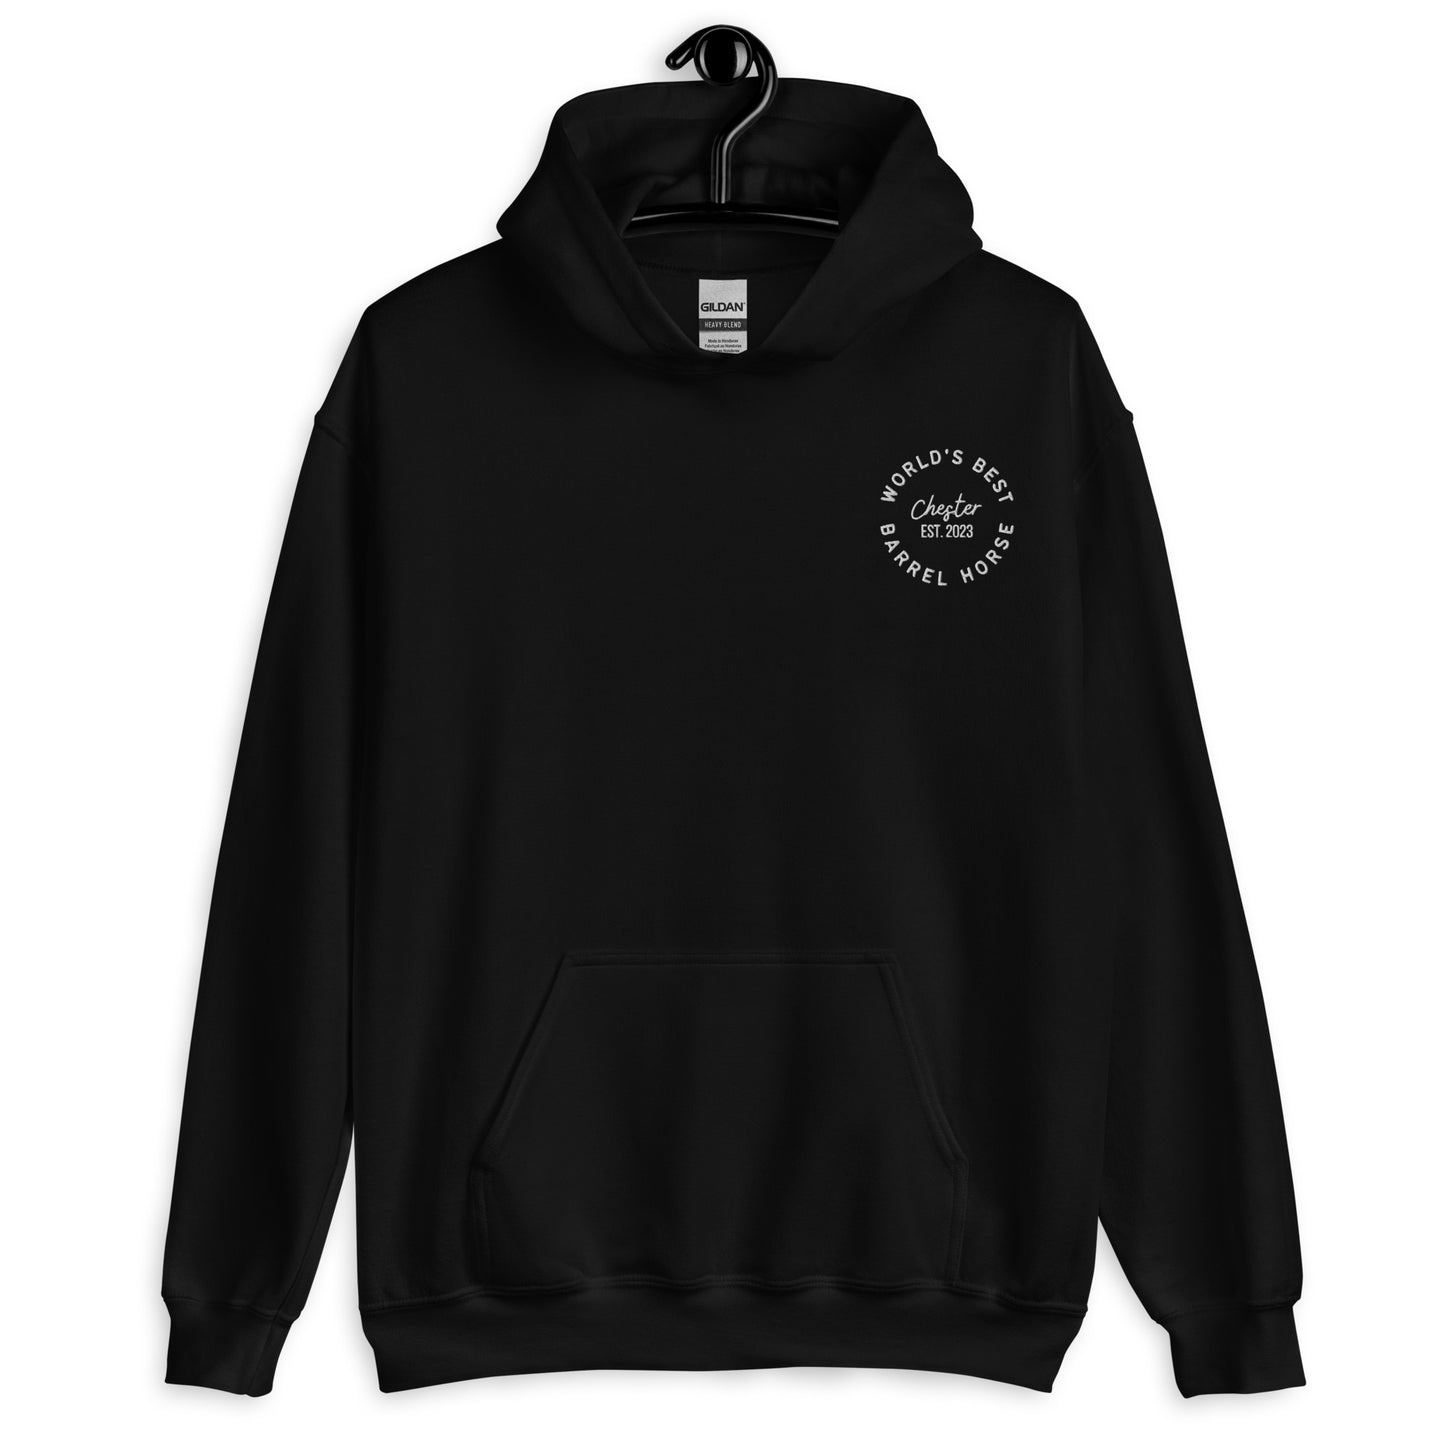 WBBH Logo Embroidered Unisex Hoodie